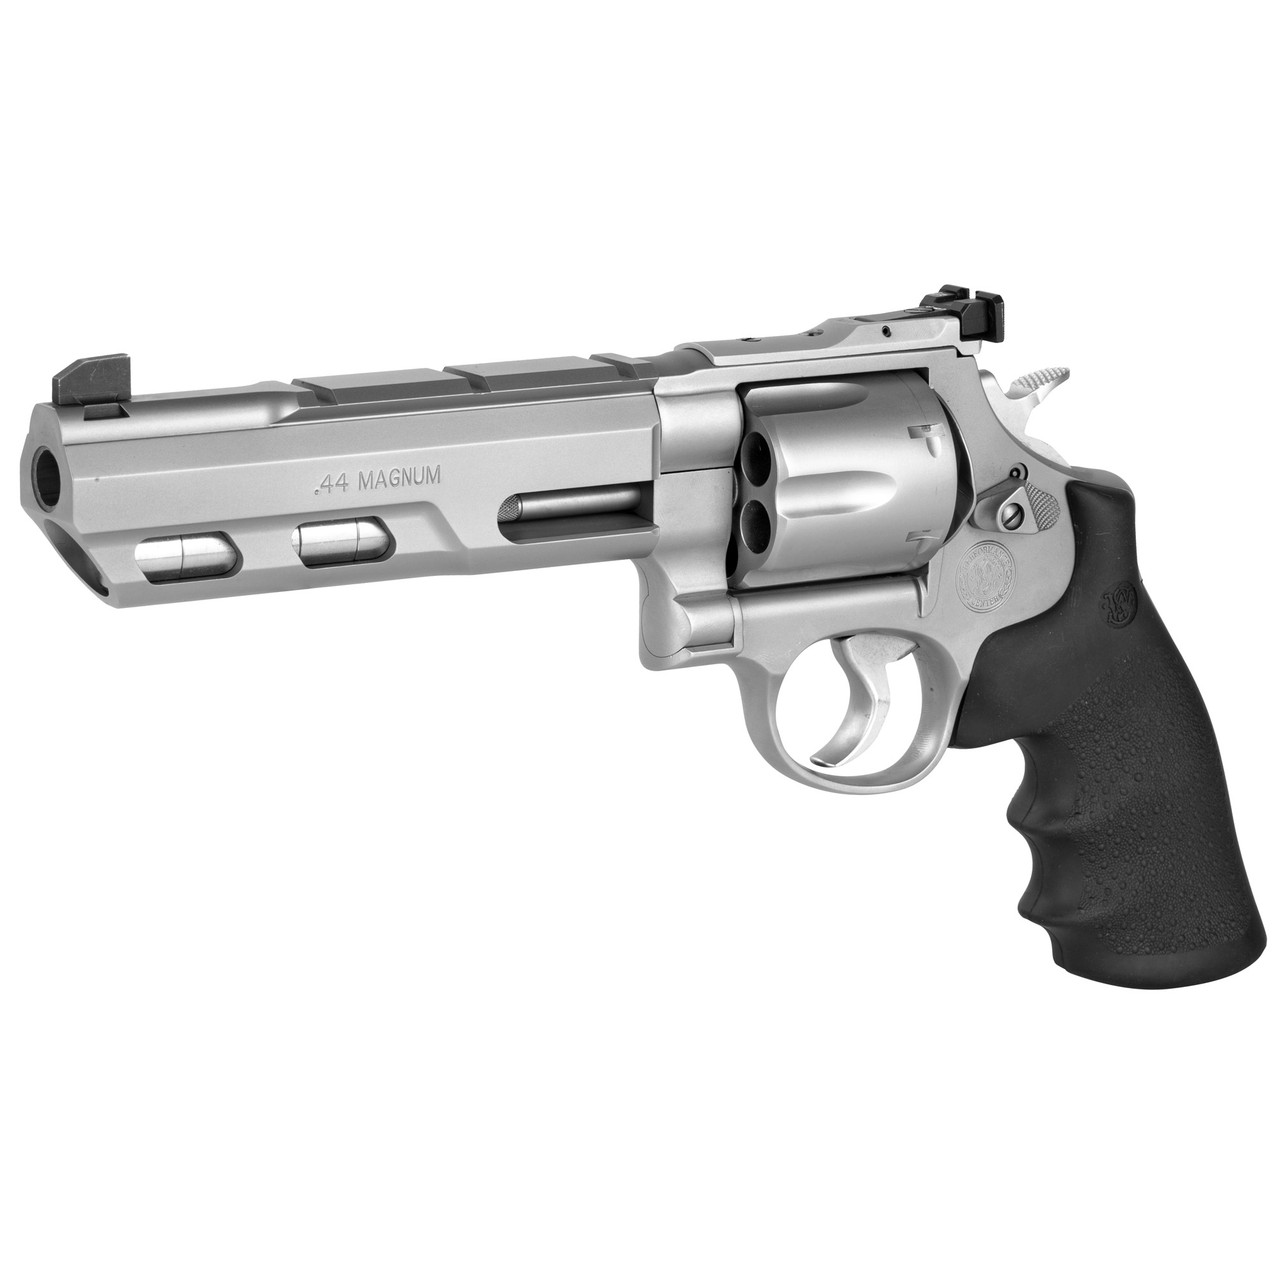 Smith & Wesson Model 629 Performance Center CALIFORNIA LEGAL - .44 Mag - Stainless